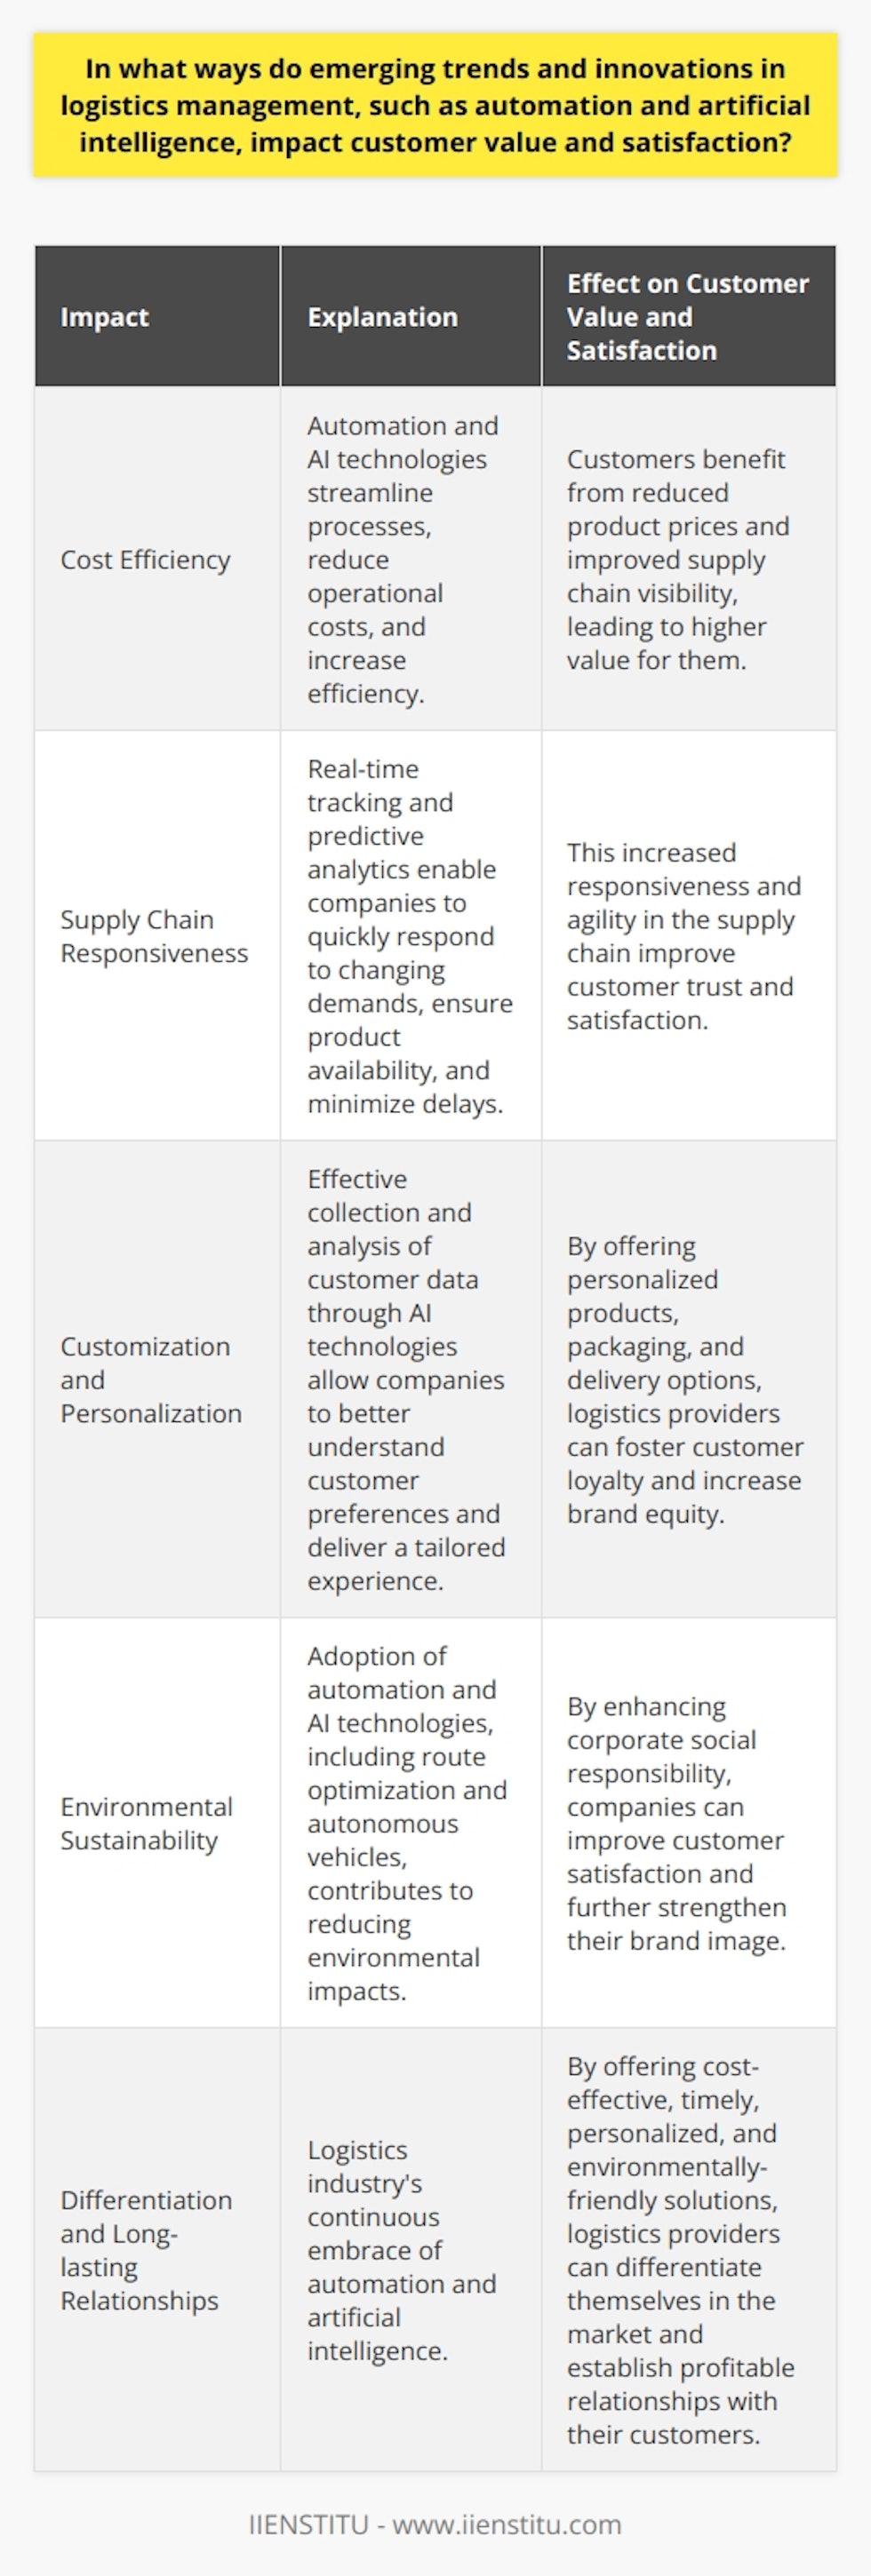 Key Takeaways1. Cost Efficiency: Automation and AI technologies in logistics management streamline processes, reduce operational costs, and increase efficiency. As a result, customers benefit from reduced product prices and improved supply chain visibility, leading to higher value for them.2. Supply Chain Responsiveness: Real-time tracking and predictive analytics enable companies to quickly respond to changing demands, ensure product availability, and minimize delays in deliveries. This increased responsiveness and agility in the supply chain improve customer trust and satisfaction.3. Customization and Personalization: The effective collection and analysis of customer data through AI technologies allow companies to better understand customer preferences and deliver a tailored experience. By offering personalized products, packaging, and delivery options, logistics providers can foster customer loyalty and increase brand equity.4. Environmental Sustainability: The adoption of automation and AI technologies in logistics management, including route optimization and autonomous vehicles, contributes to reducing environmental impacts. By enhancing their corporate social responsibility, companies can improve customer satisfaction and further strengthen their brand image.As the logistics industry continues to embrace automation and artificial intelligence, it is essential for companies to focus on the benefits these innovations bring to customer value and satisfaction. By offering cost-effective, timely, personalized, and environmentally-friendly solutions, logistics providers can differentiate themselves in the market and establish long-lasting and profitable relationships with their customers.